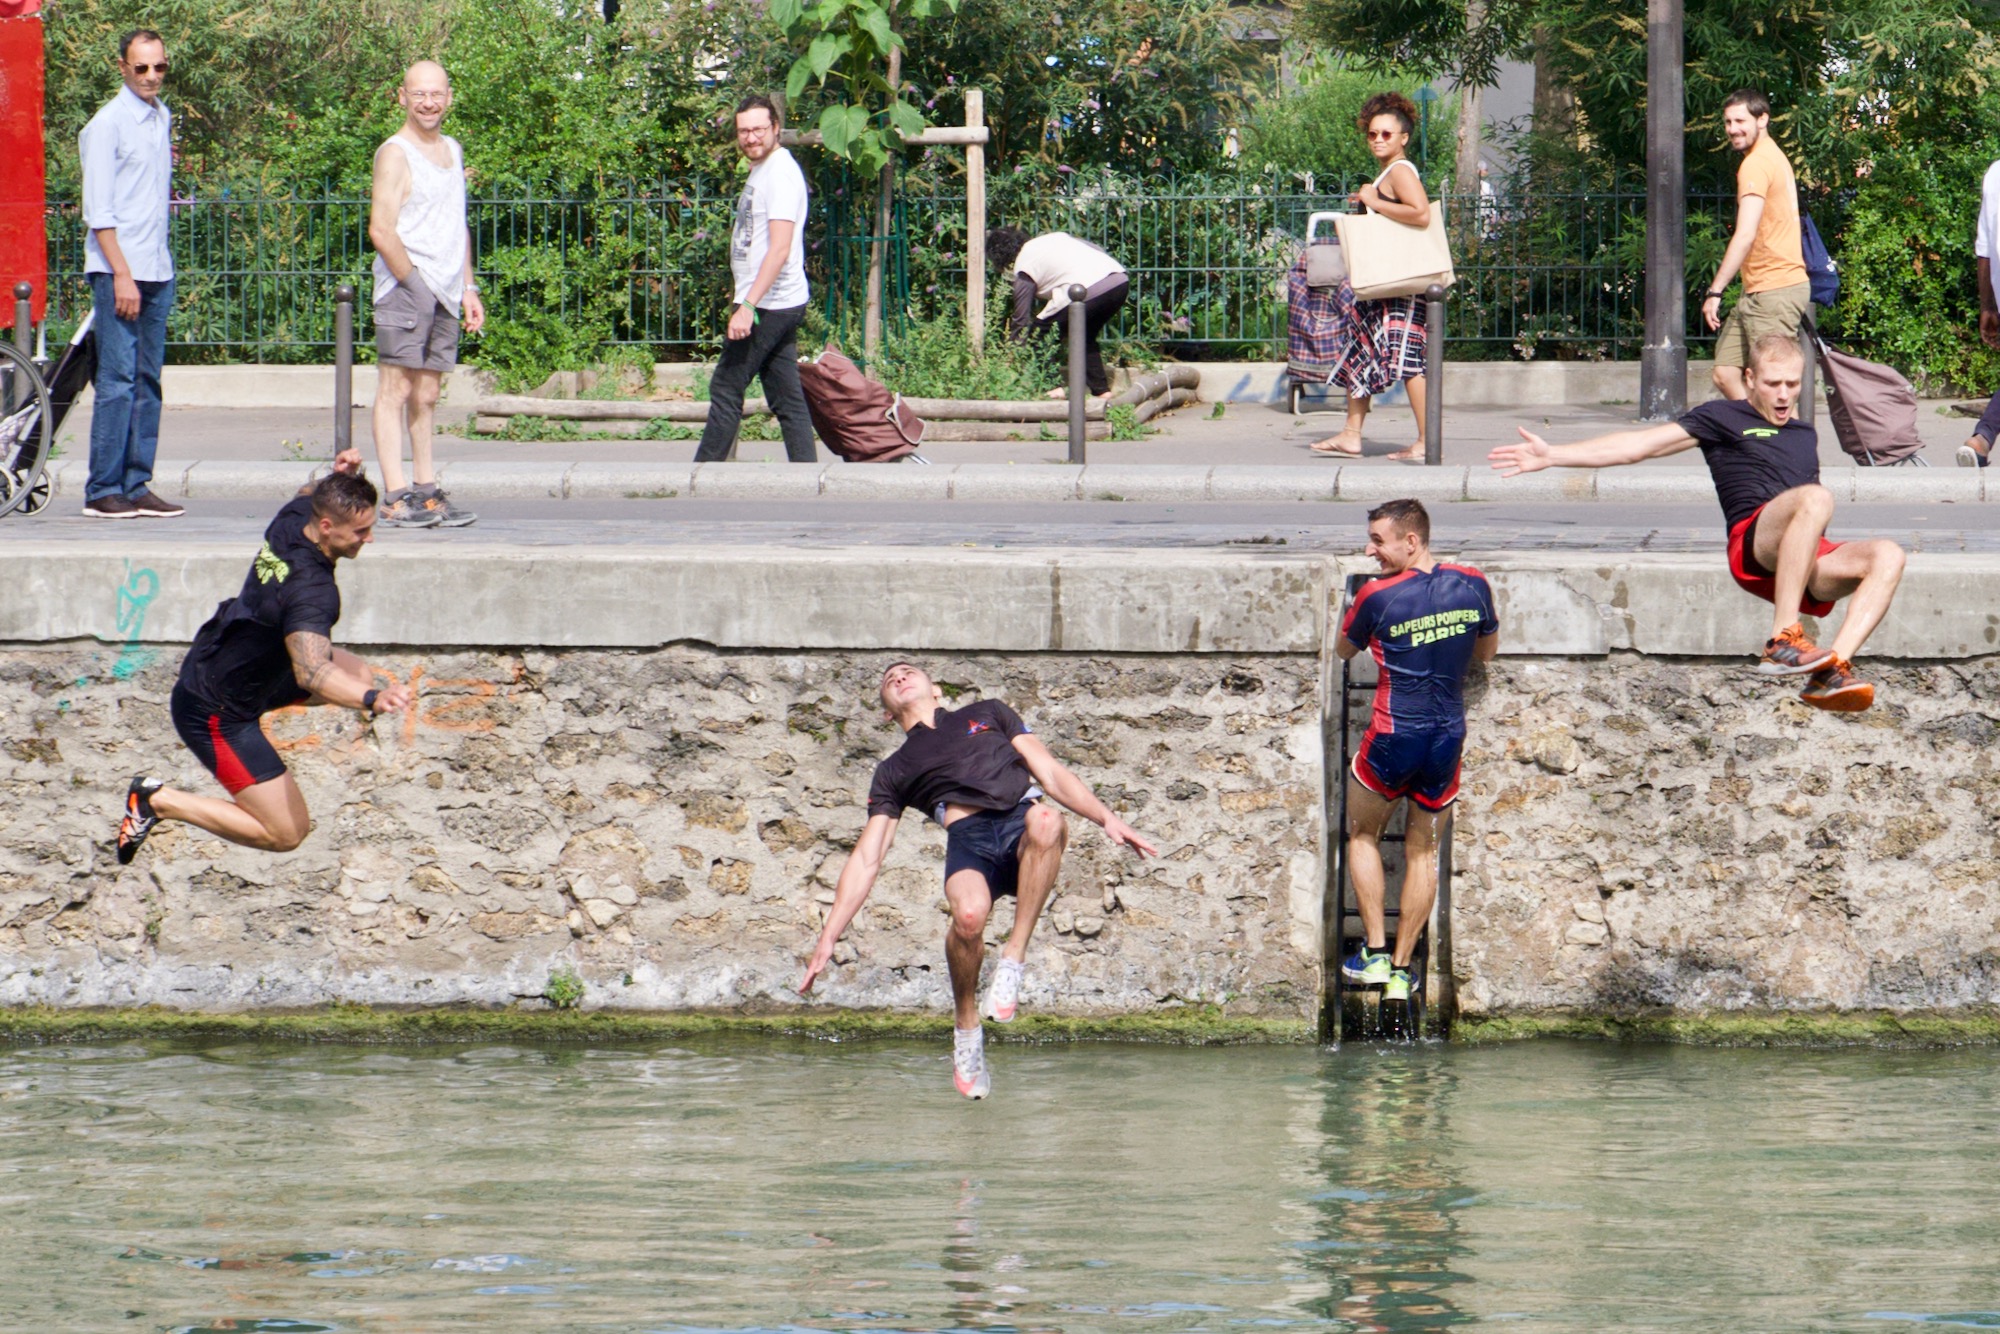 A photo of people jumping into water